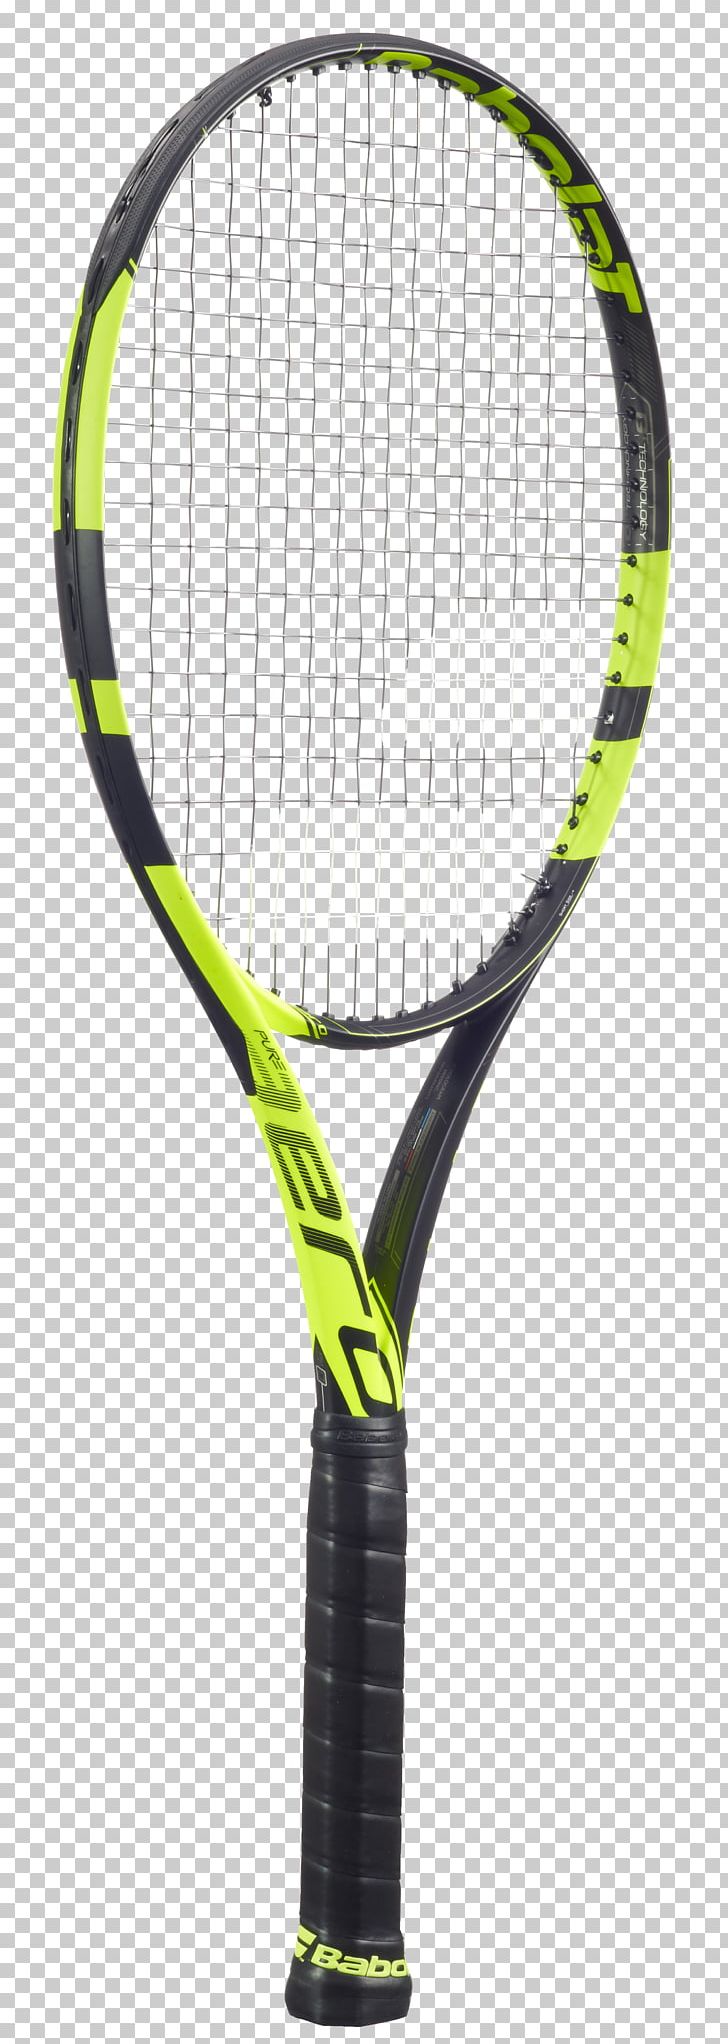 French Open Babolat Racket Grip Tennis PNG, Clipart, Aero, Babolat, French Open, Grip, Head Free PNG Download